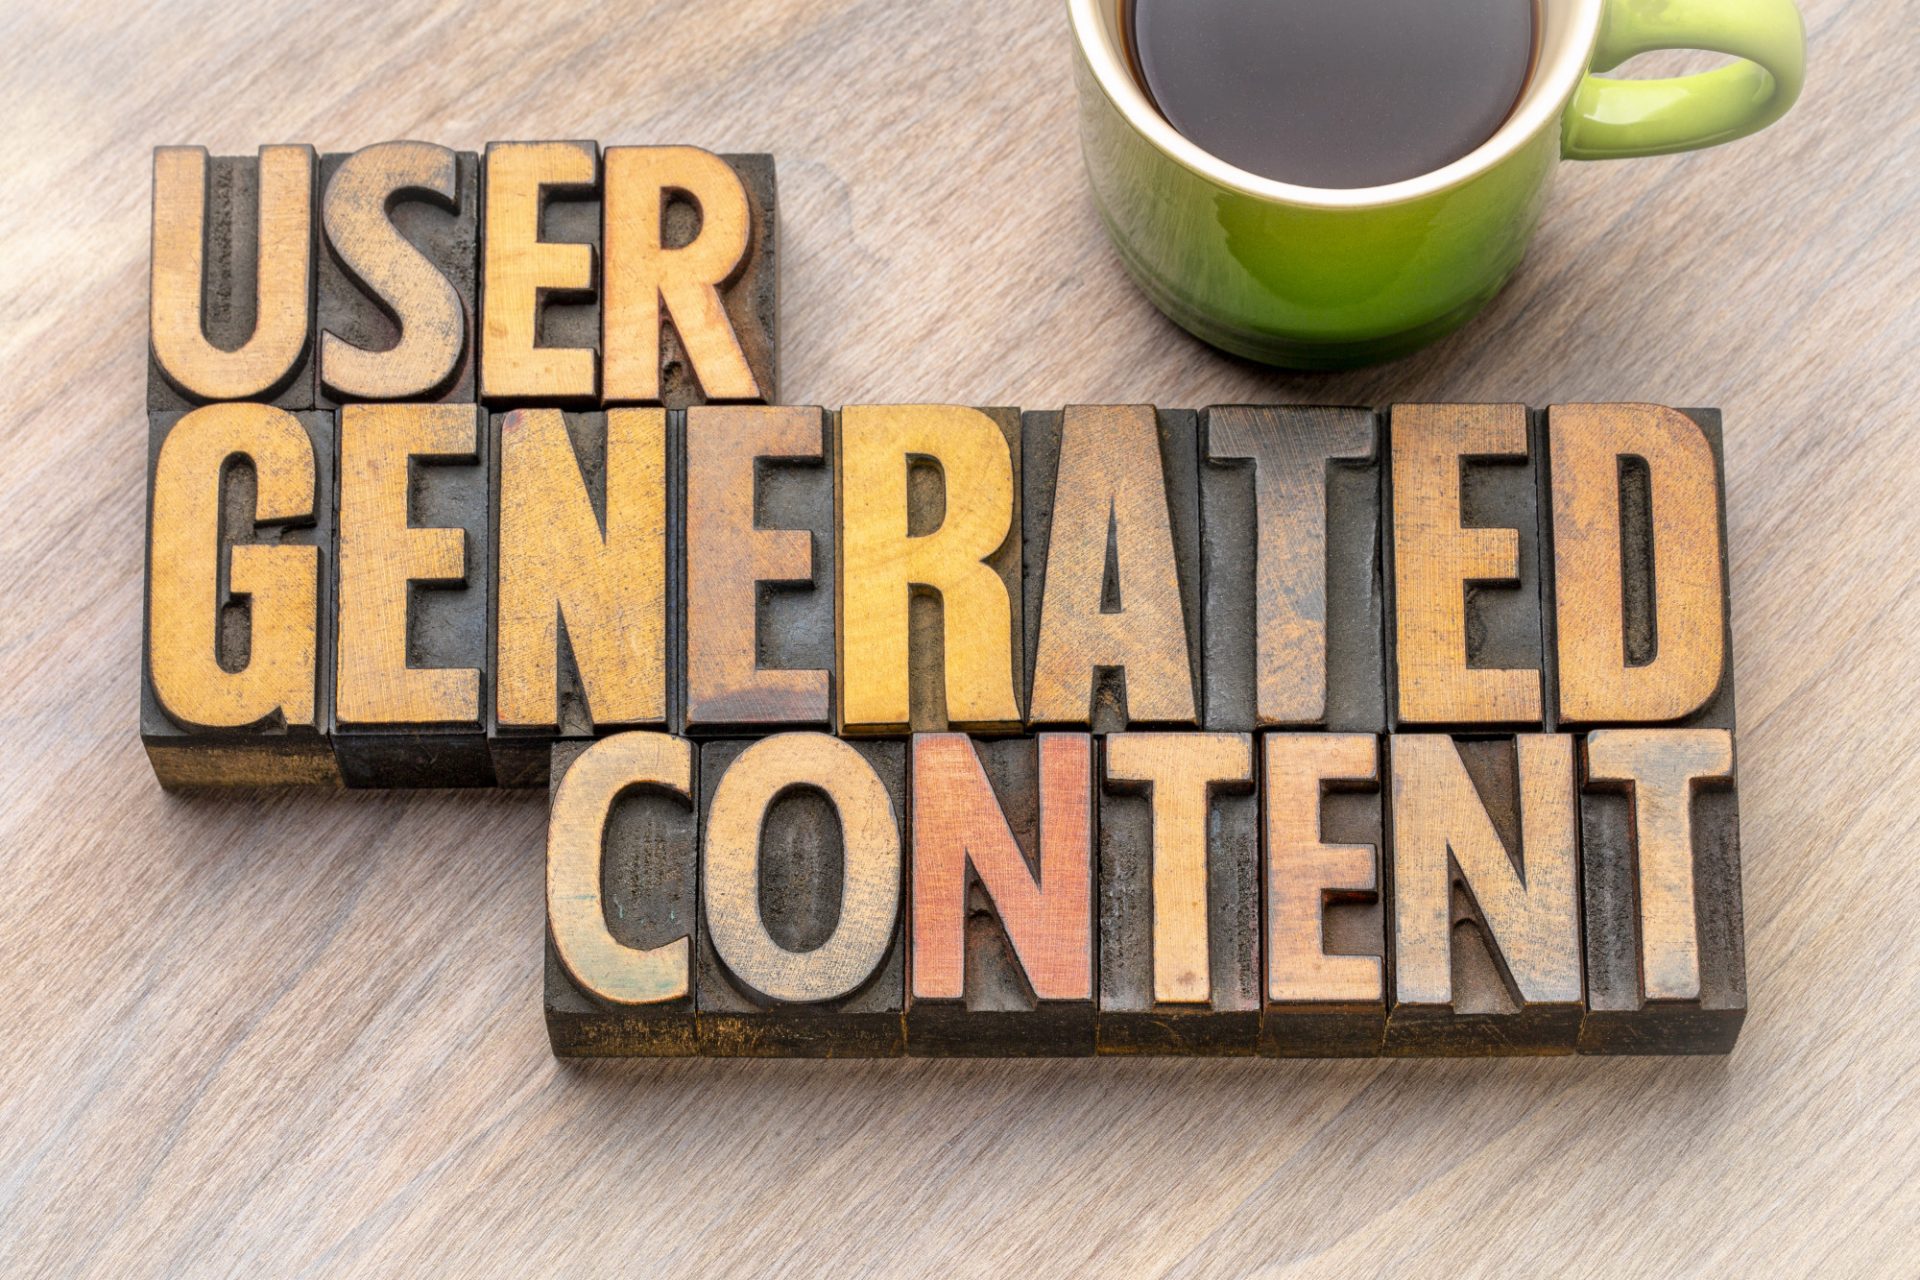 User Generated Content: The Community is Full Of Creators!